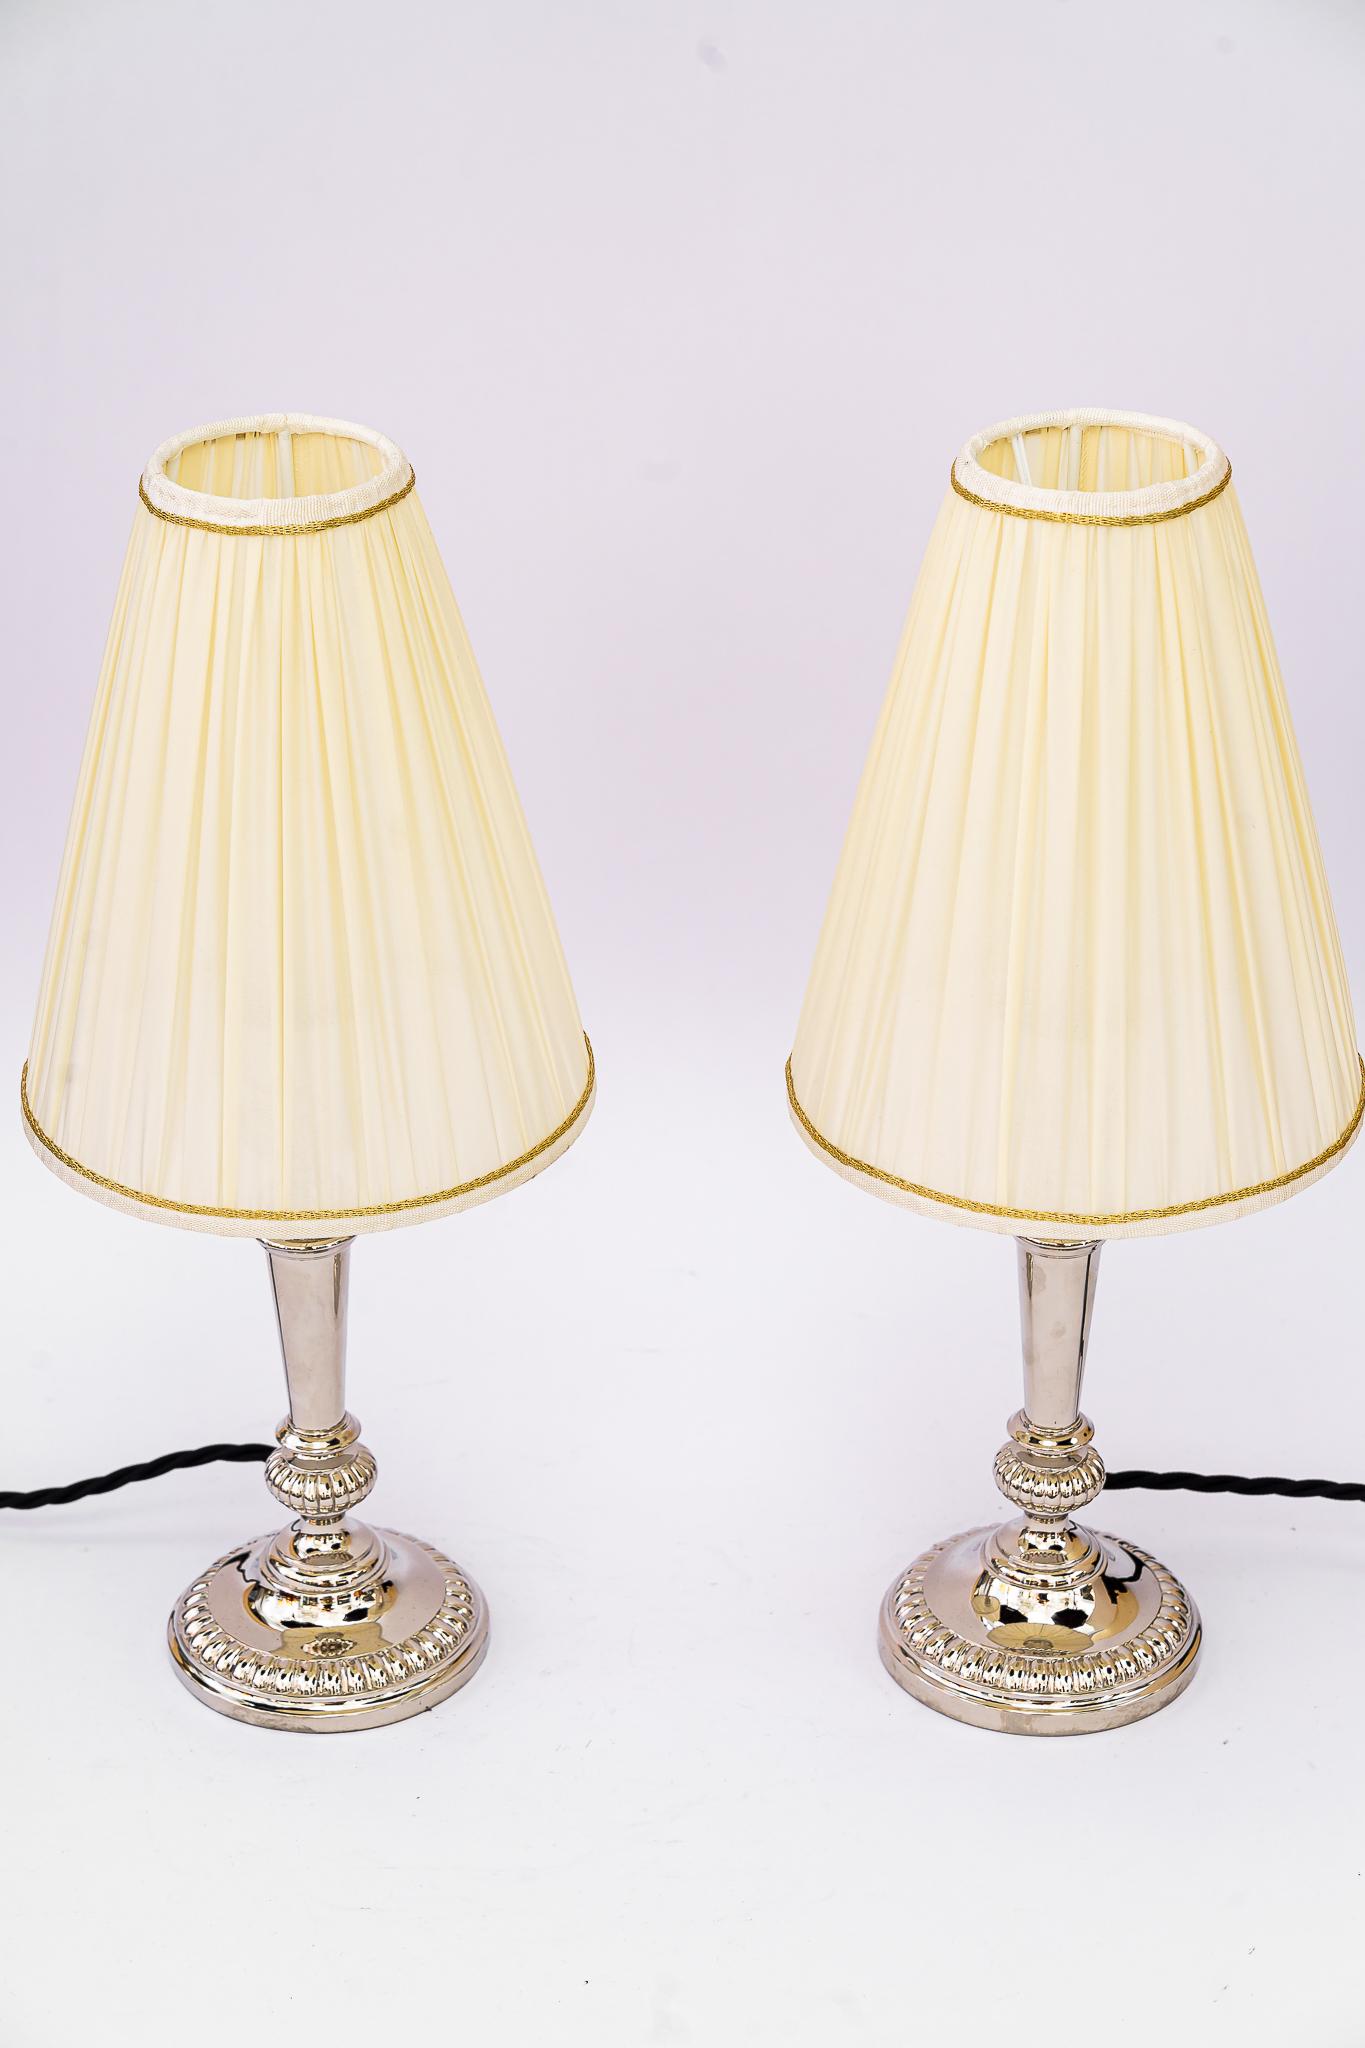 2 Art deco nickel - plated table lamps with fabric shades, Vienna, around 1920s
Brass nickel - plated.
The fabric shades are replaced (new).